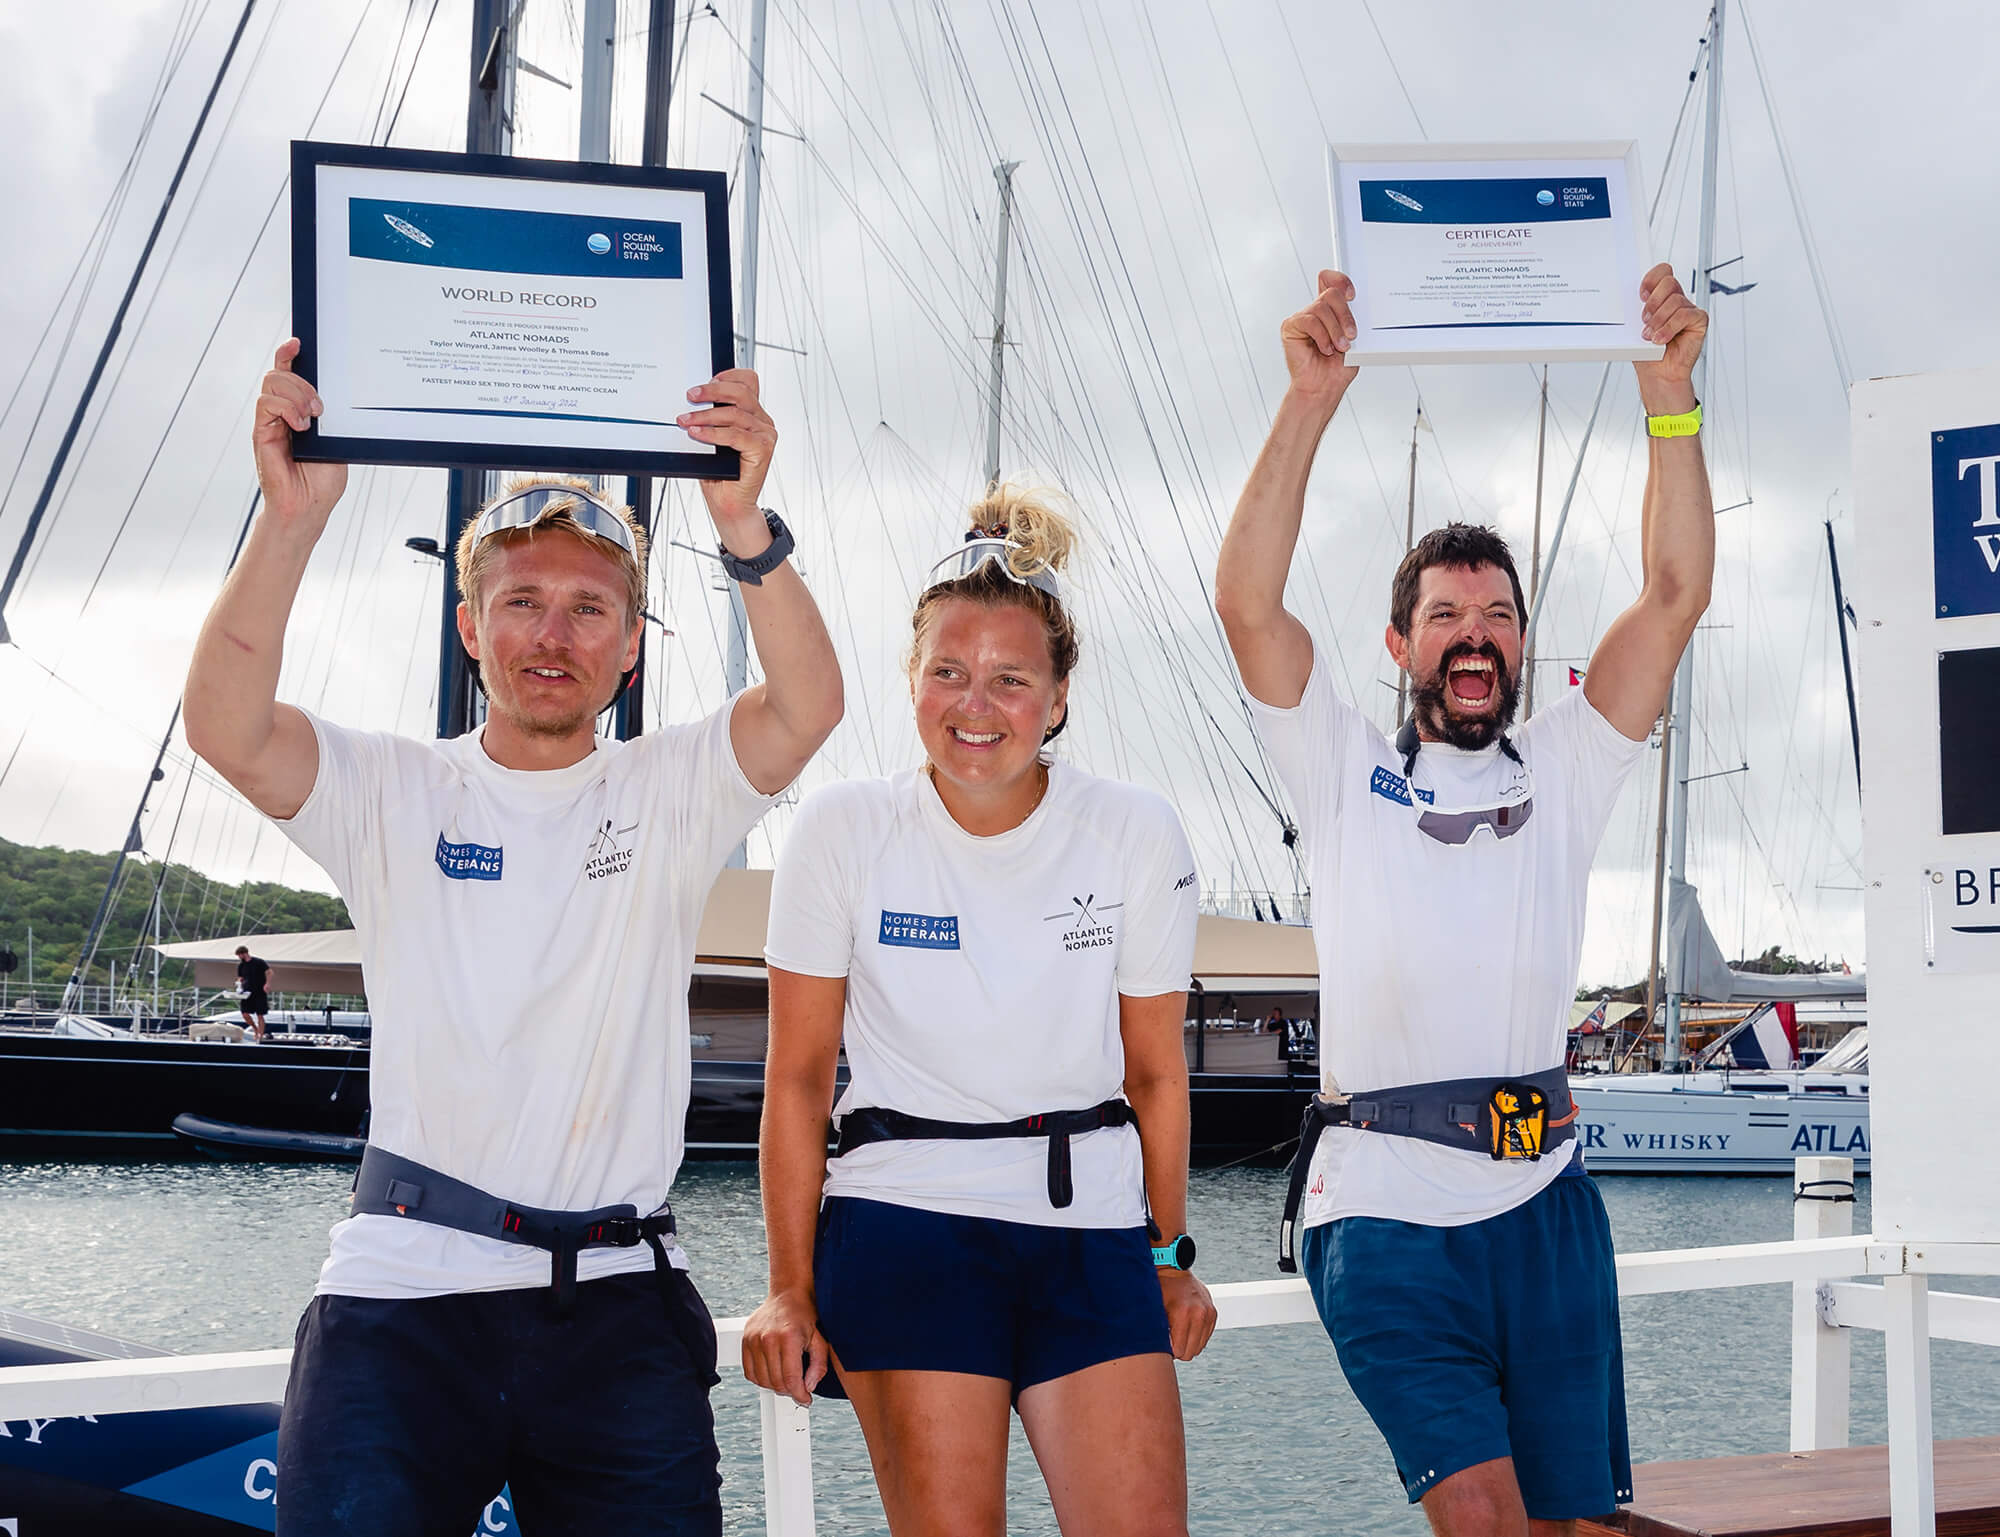 NEW WORLD RECORD - Congratulations to Team Atlantic Nomads (Taylor Winyard, James Woolley & Thomas Rose) who set out from San Sebastián de La Gomera on 12 December 2021 as part of the Talisker Whisky Atlantic Challenge and successfully rowed the 2550 nautical miles across the Atlantic Ocean, arriving in Nelson’s Dockyard, Antigua on 21 January 2021 with a time of 40 Days and 37 Minutes to become the FASTEST MIXED SEX TRIO TO ROW THE ATLANTIC OCEAN.